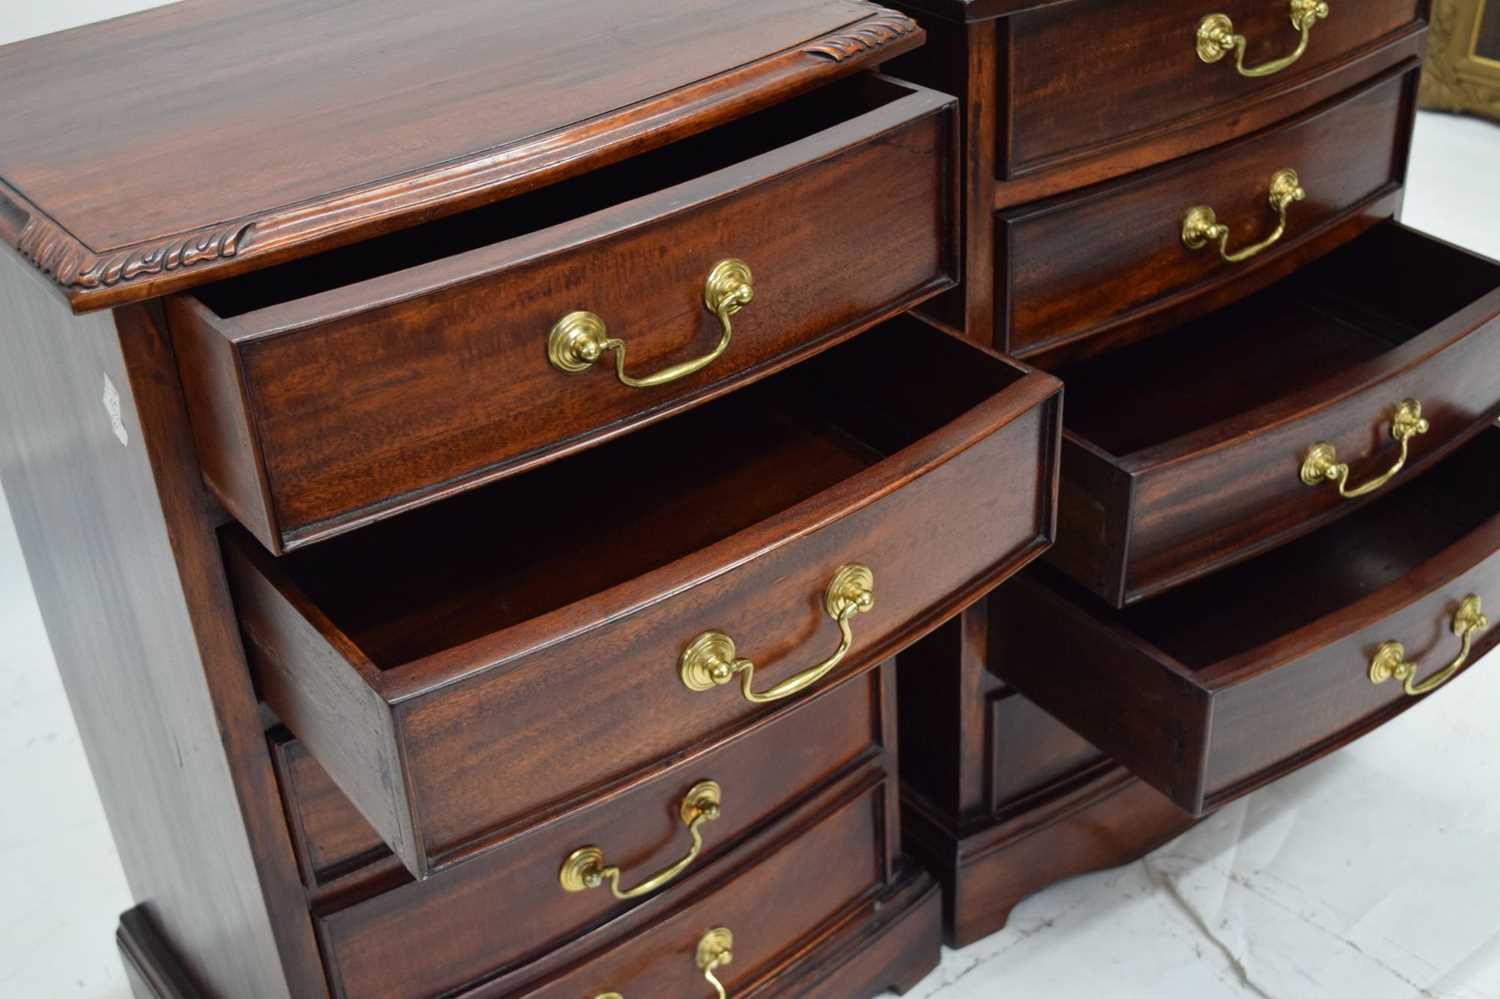 Pair of reproduction mahogany five-drawer bedside chests of drawers - Image 6 of 8